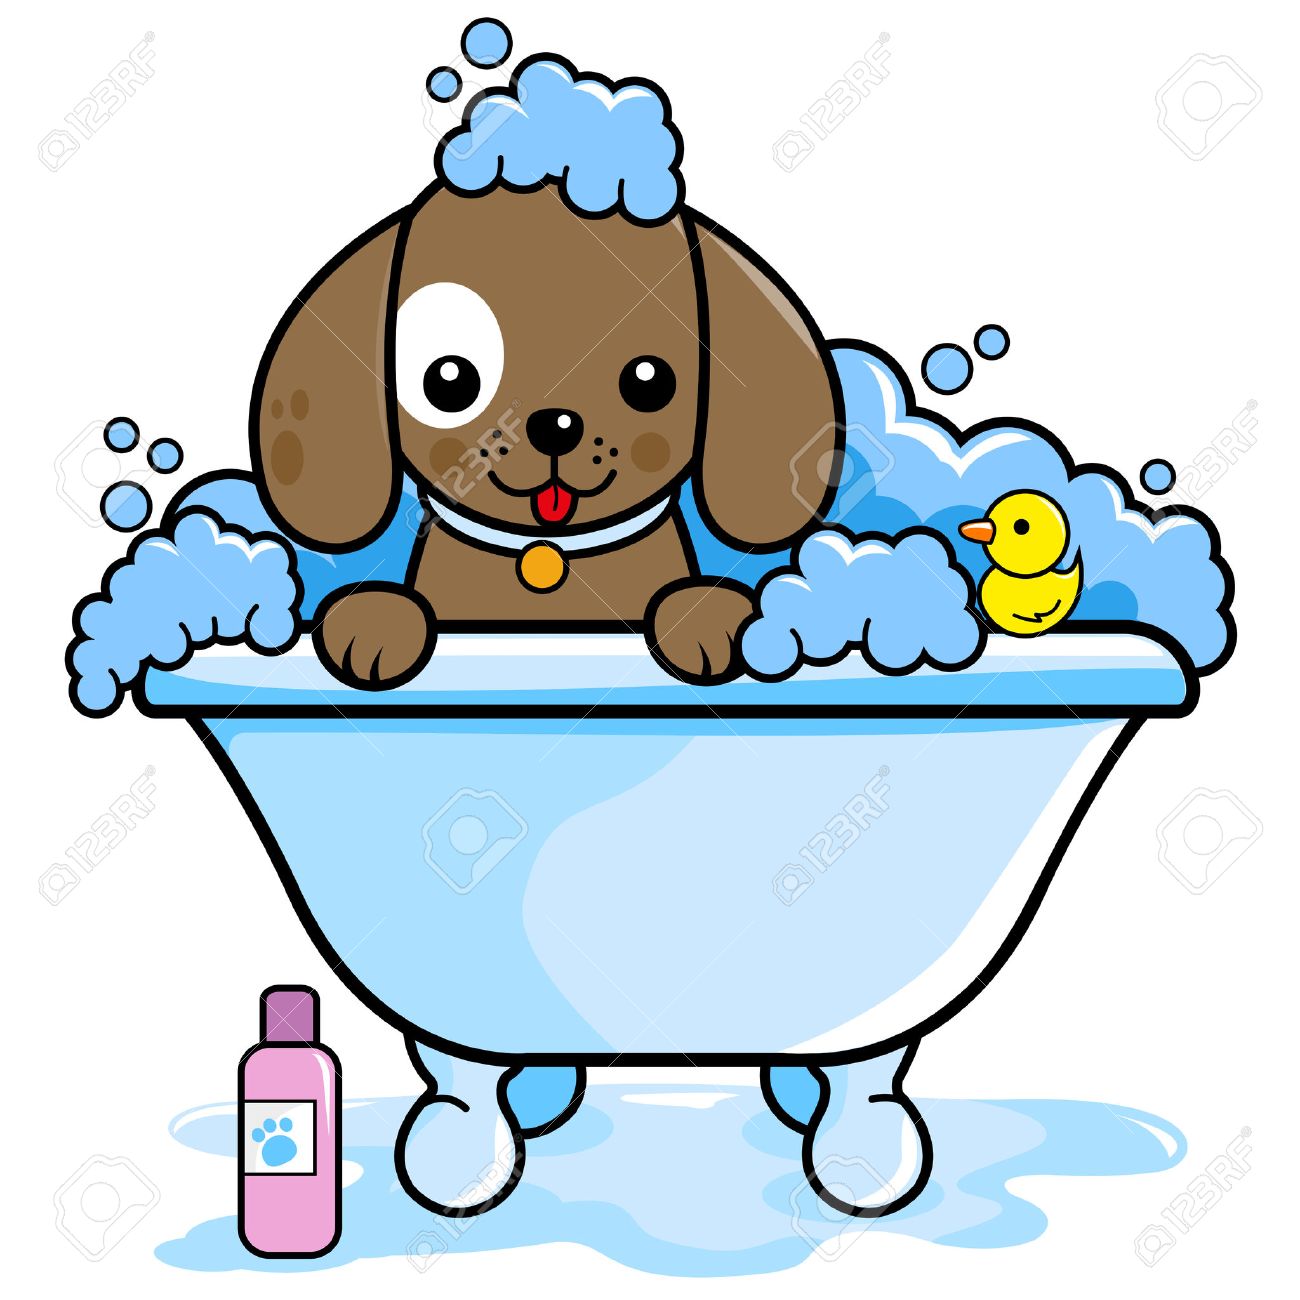 Dog Grooming Clipart.